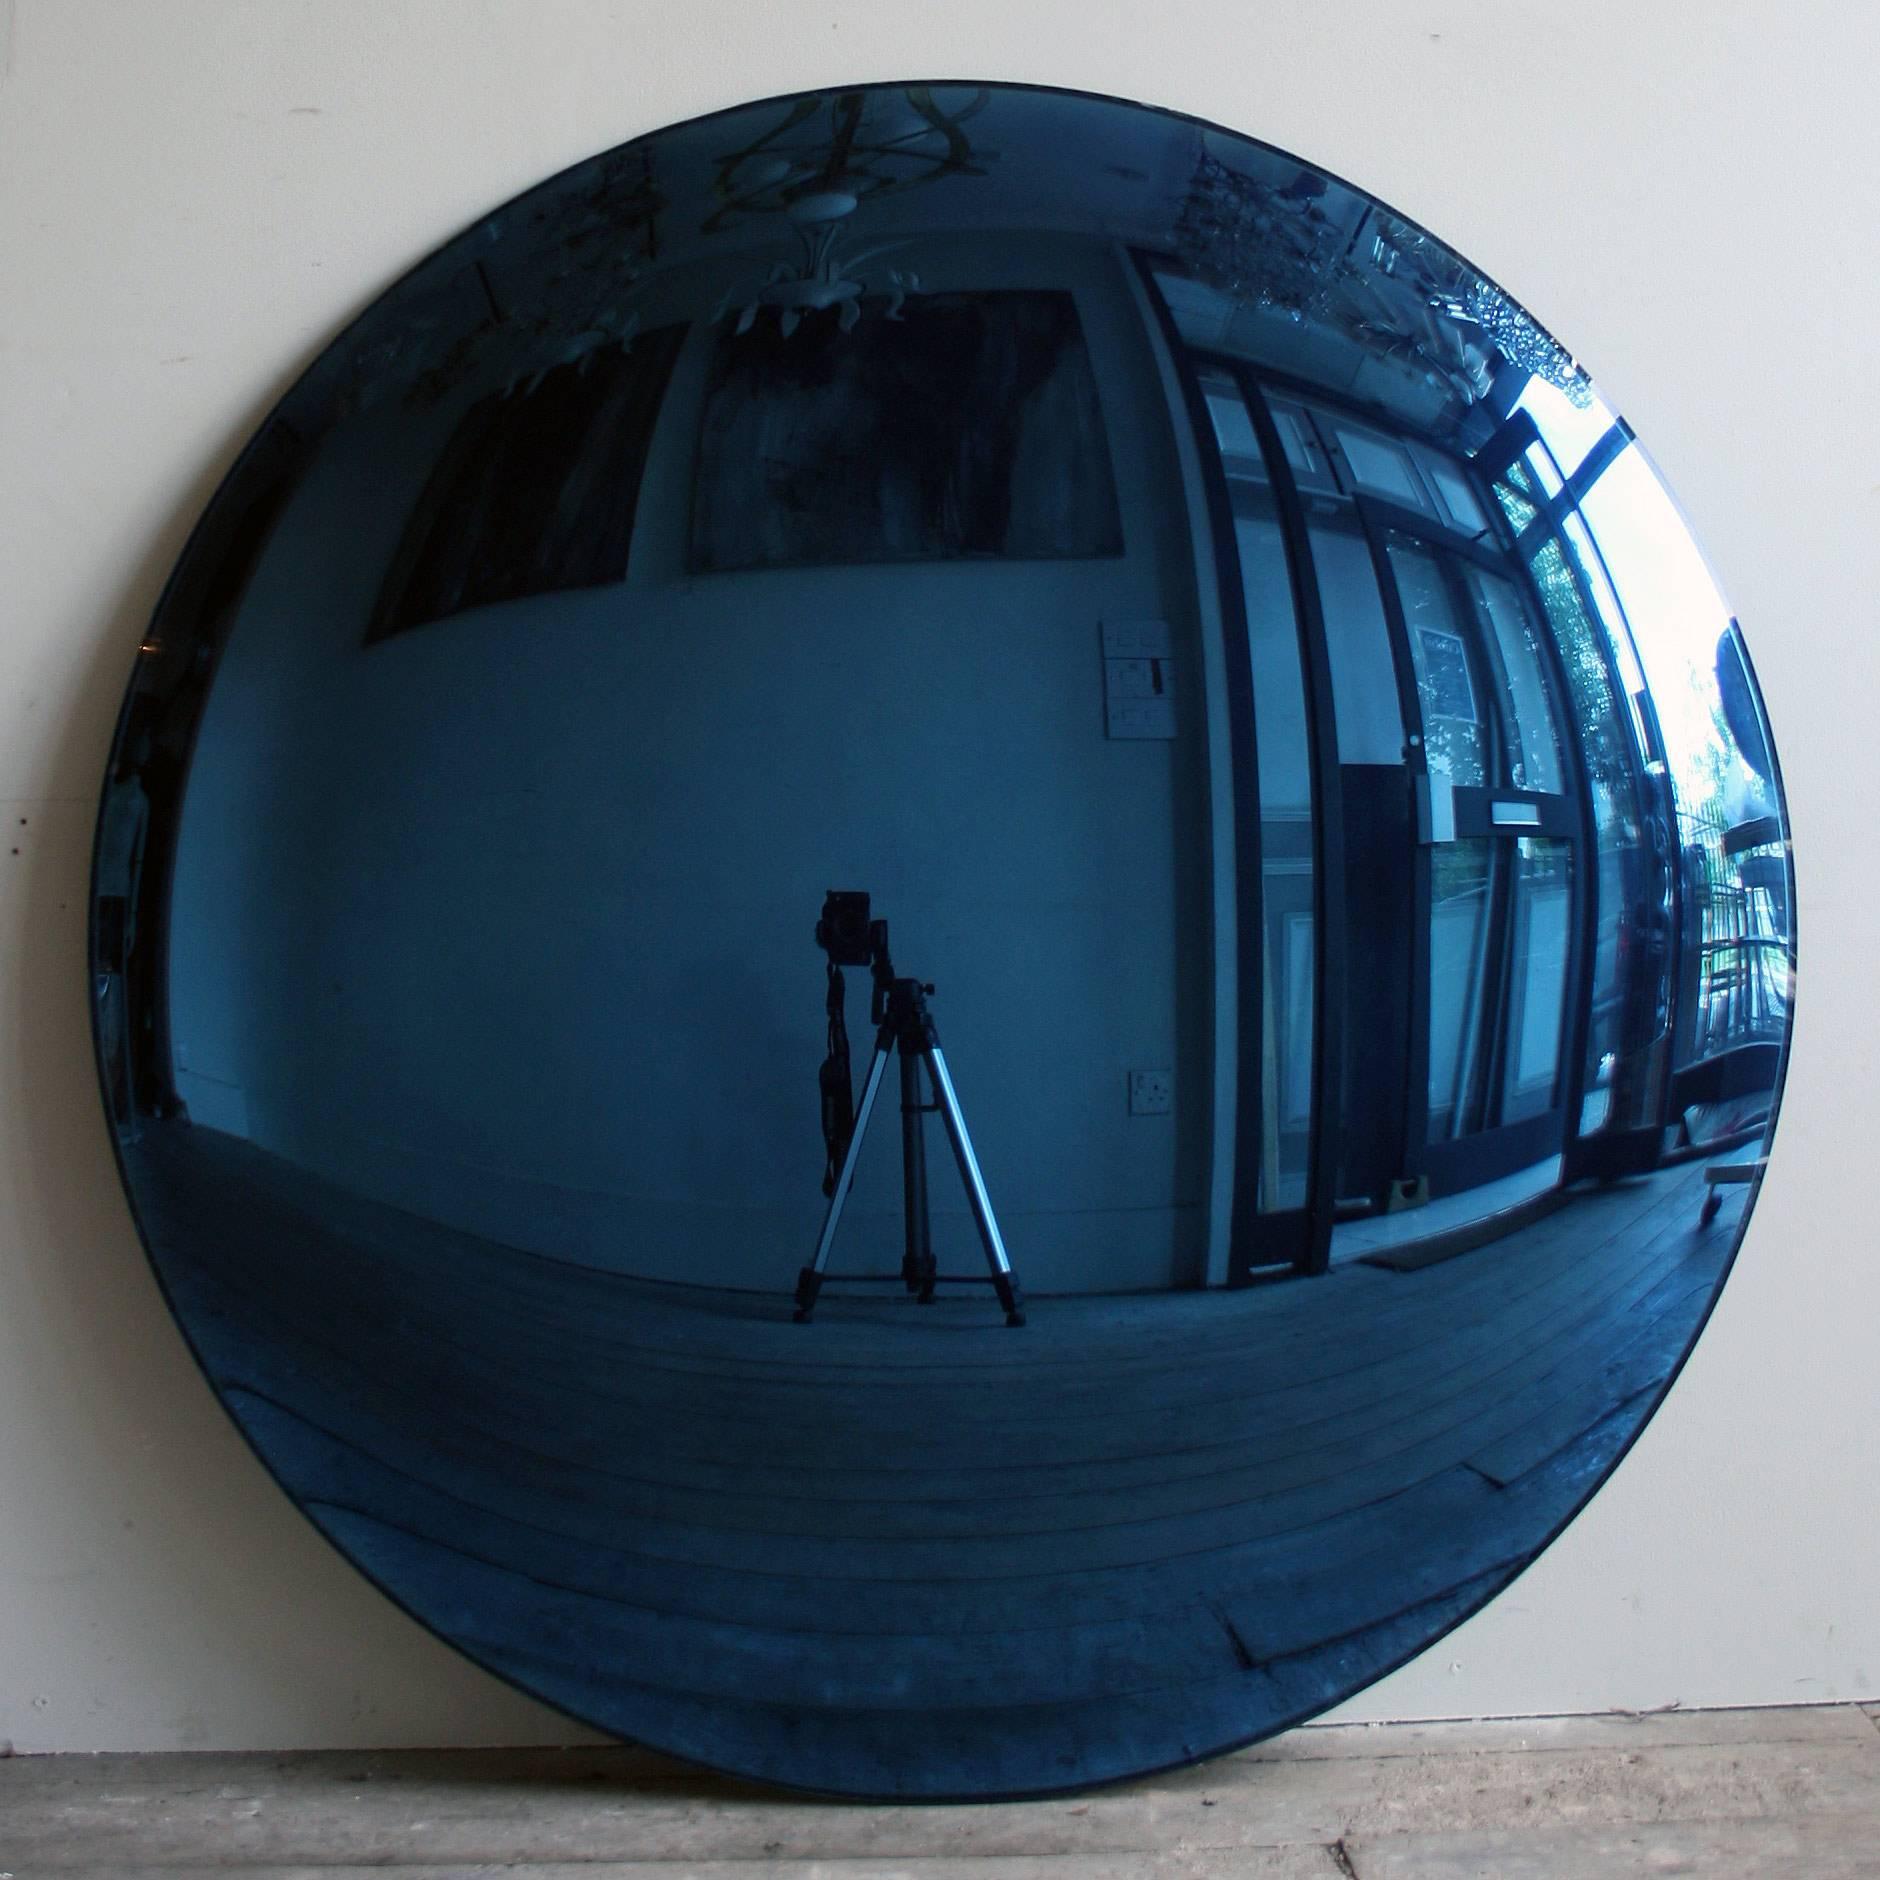 A large Blue Convex mirror 100cm in diameter, each mirror is unframed but come with x3 bespoke clips for wall installation. A real statement piece!

All color mirrors have a two-three week lead time as all made to order.

As each piece is